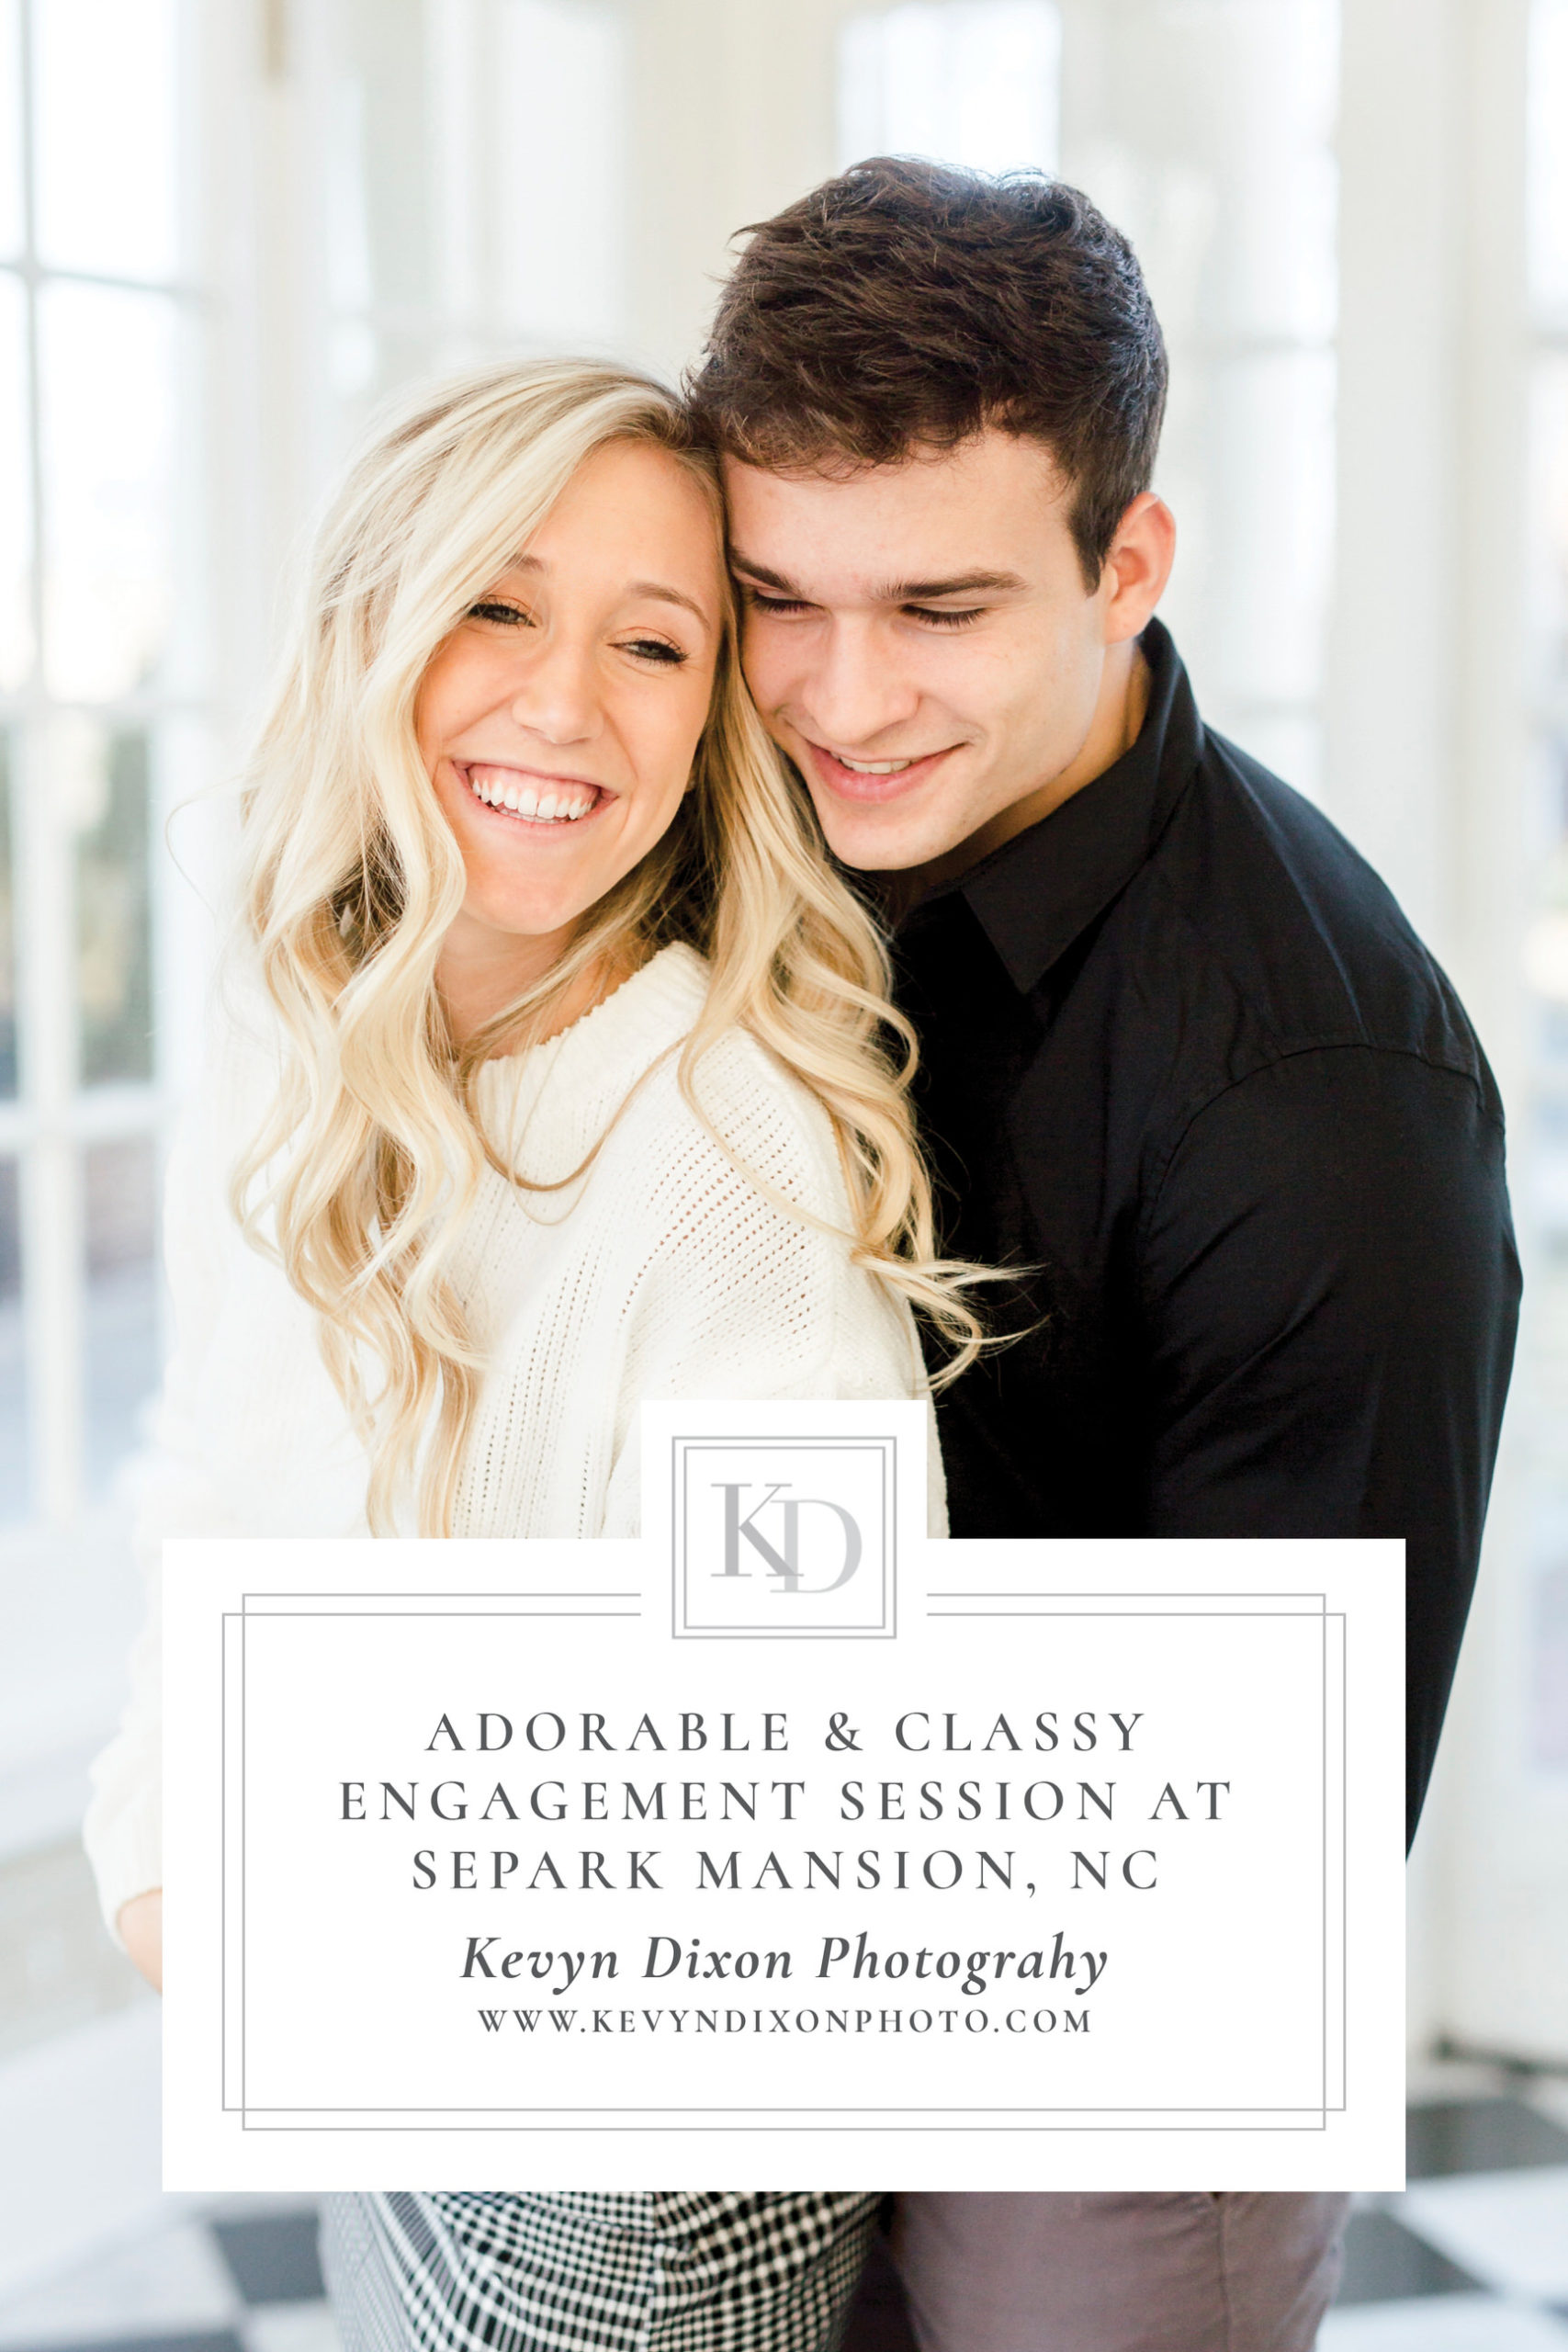 Adorable & Classy Classic Winter Engagement Session at Separk Mansion in Charlotte, NC by Kevyn Dixon Photography